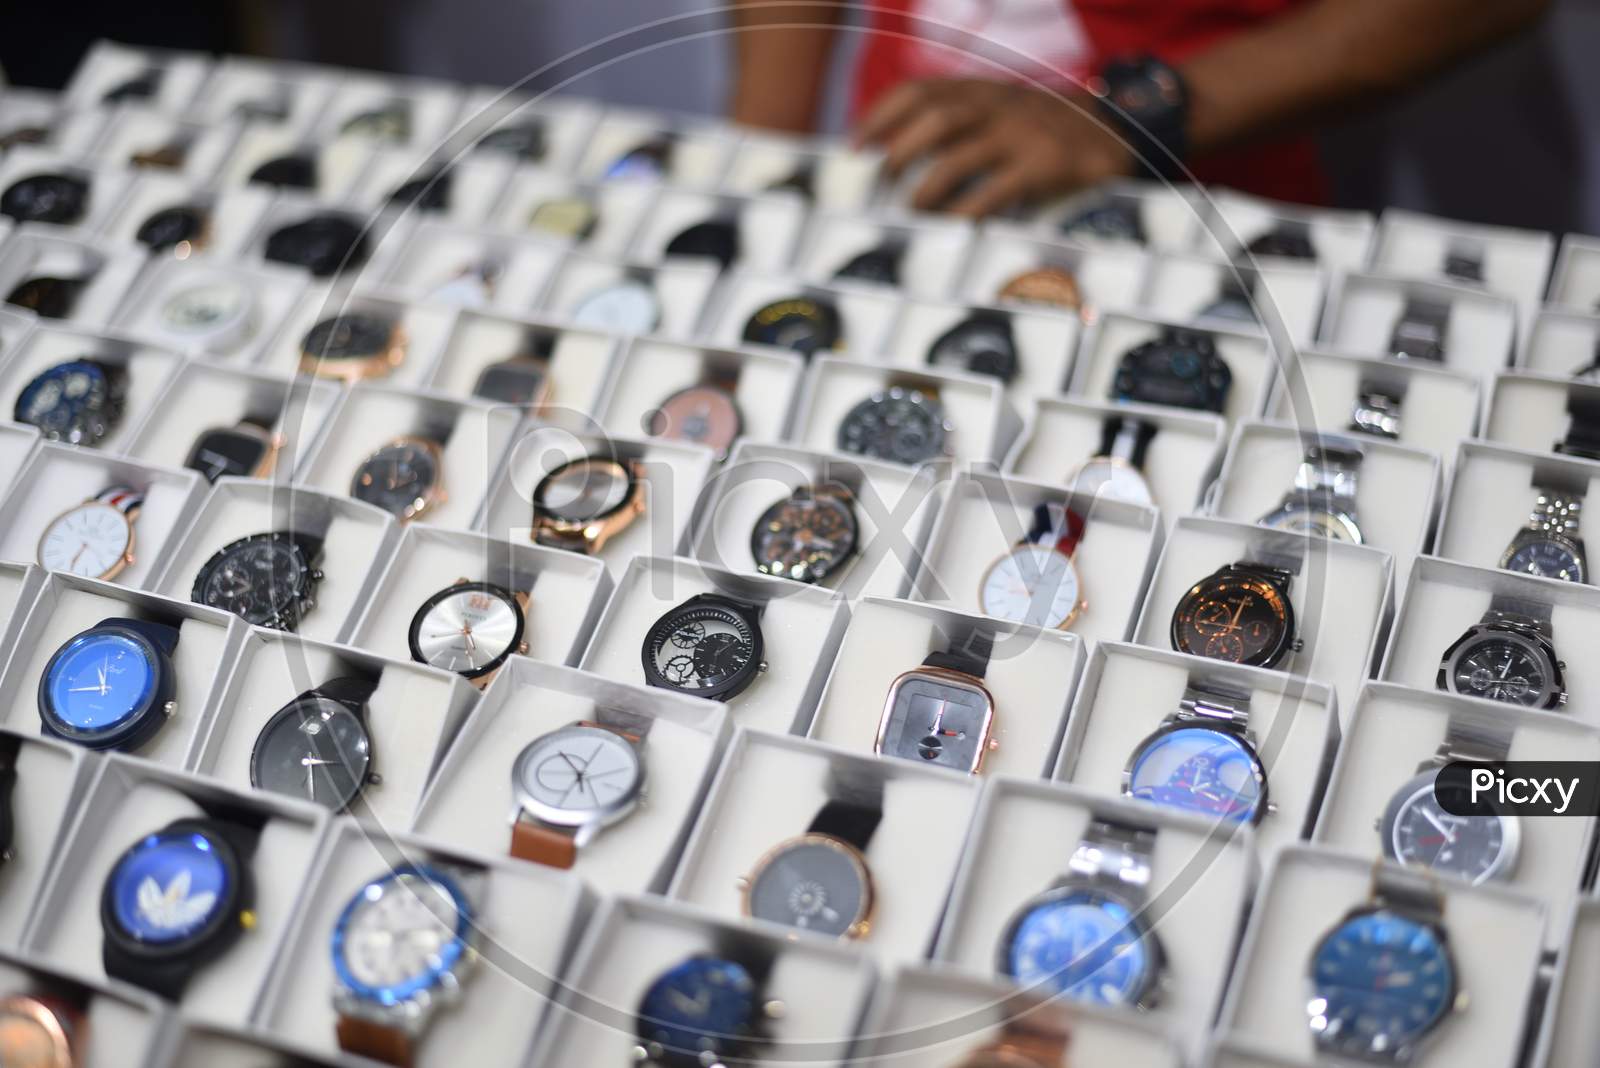 wrist watches in a stall at Numaish Exhibition